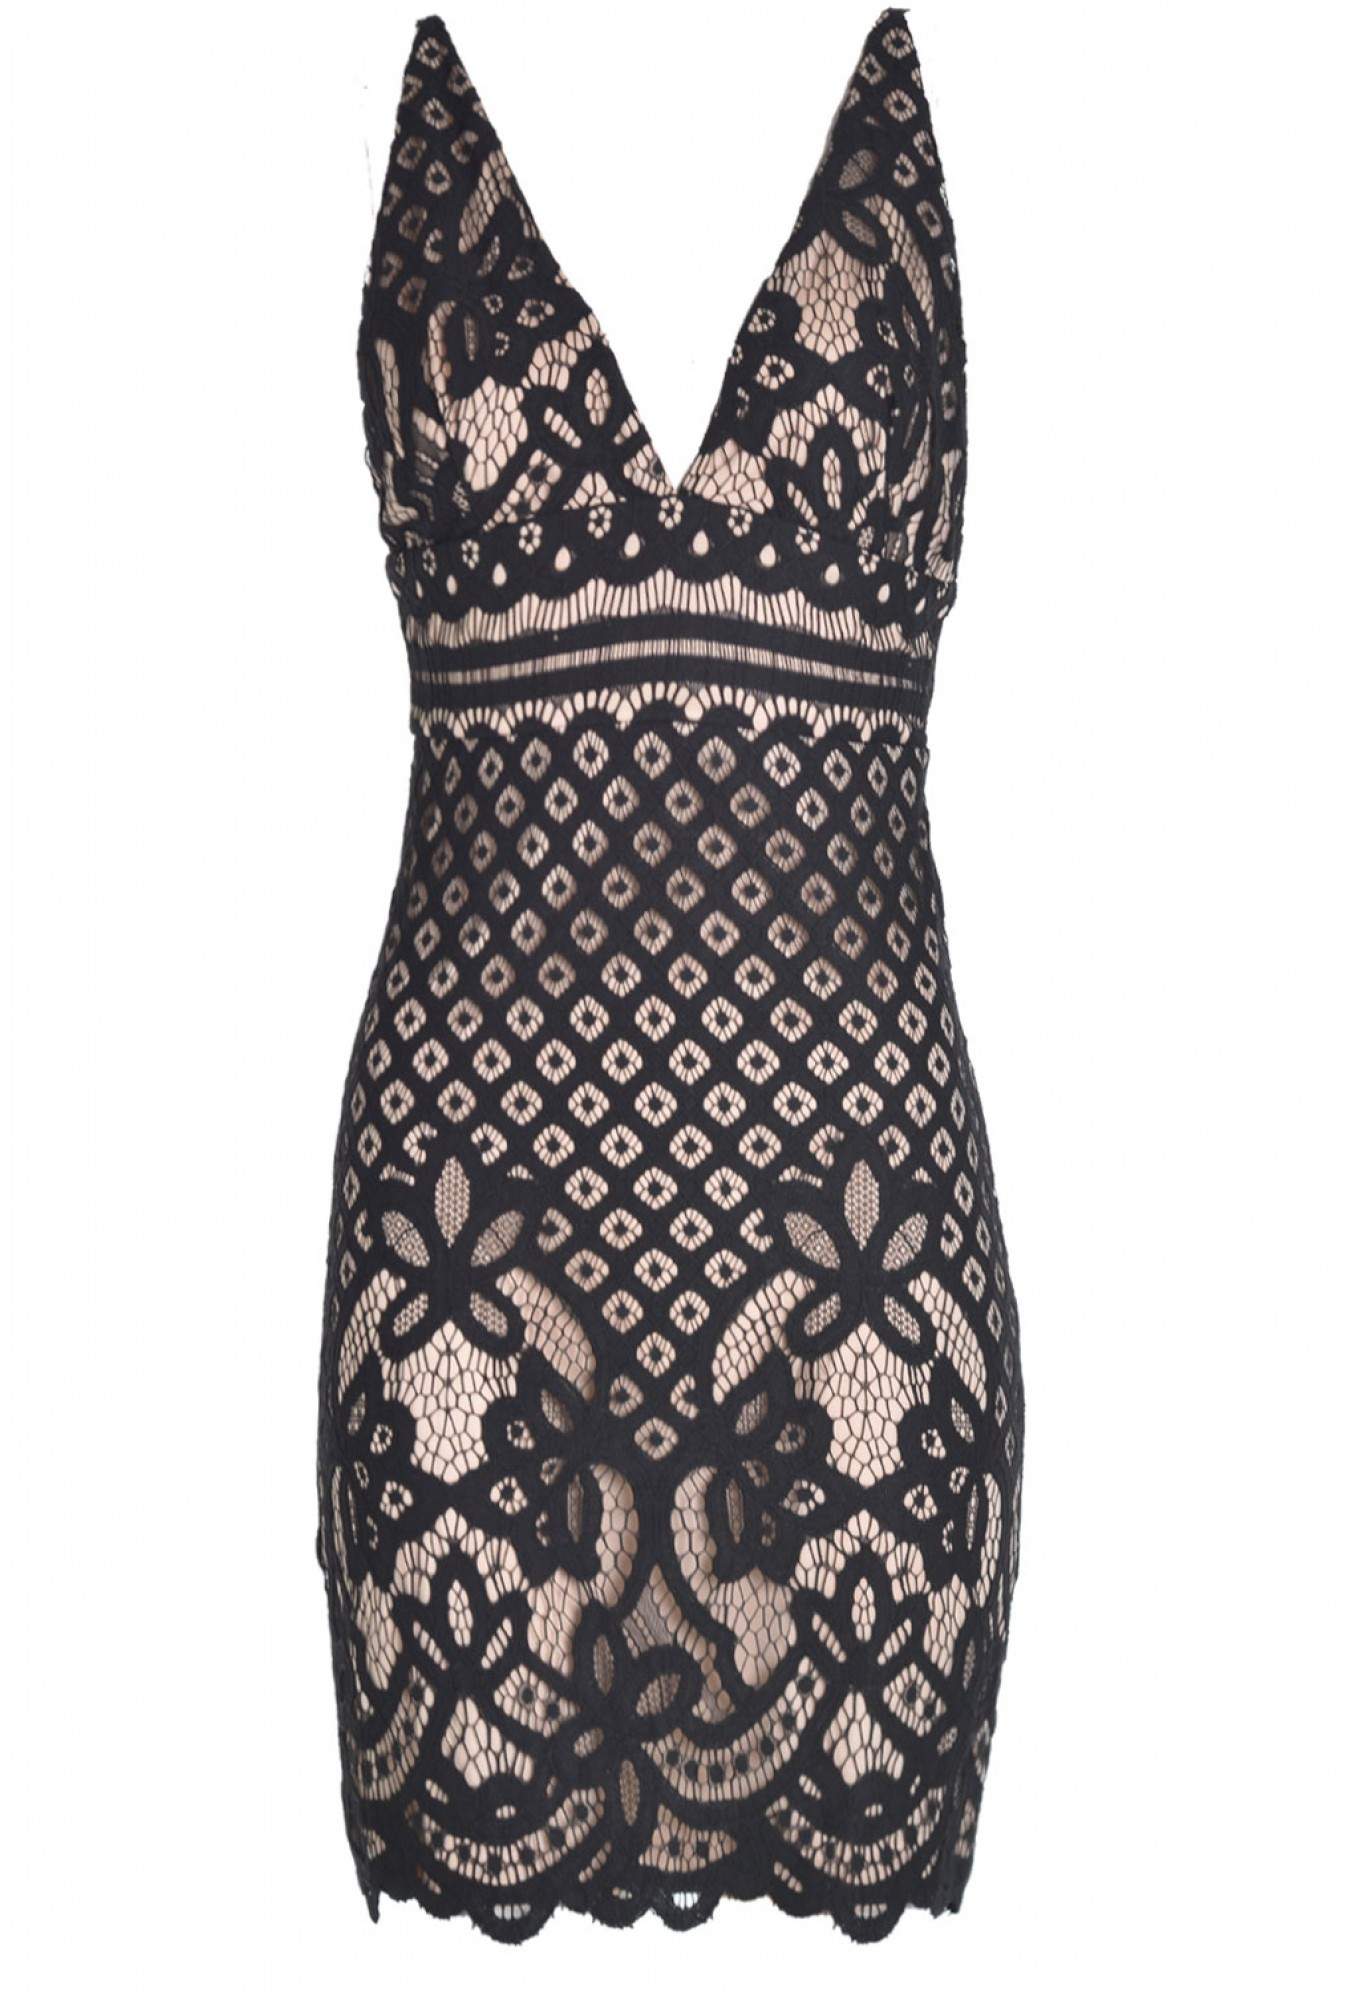 Pixie Daisy Becky Strappy Lace Crochet Dress in Black | iCLOTHING